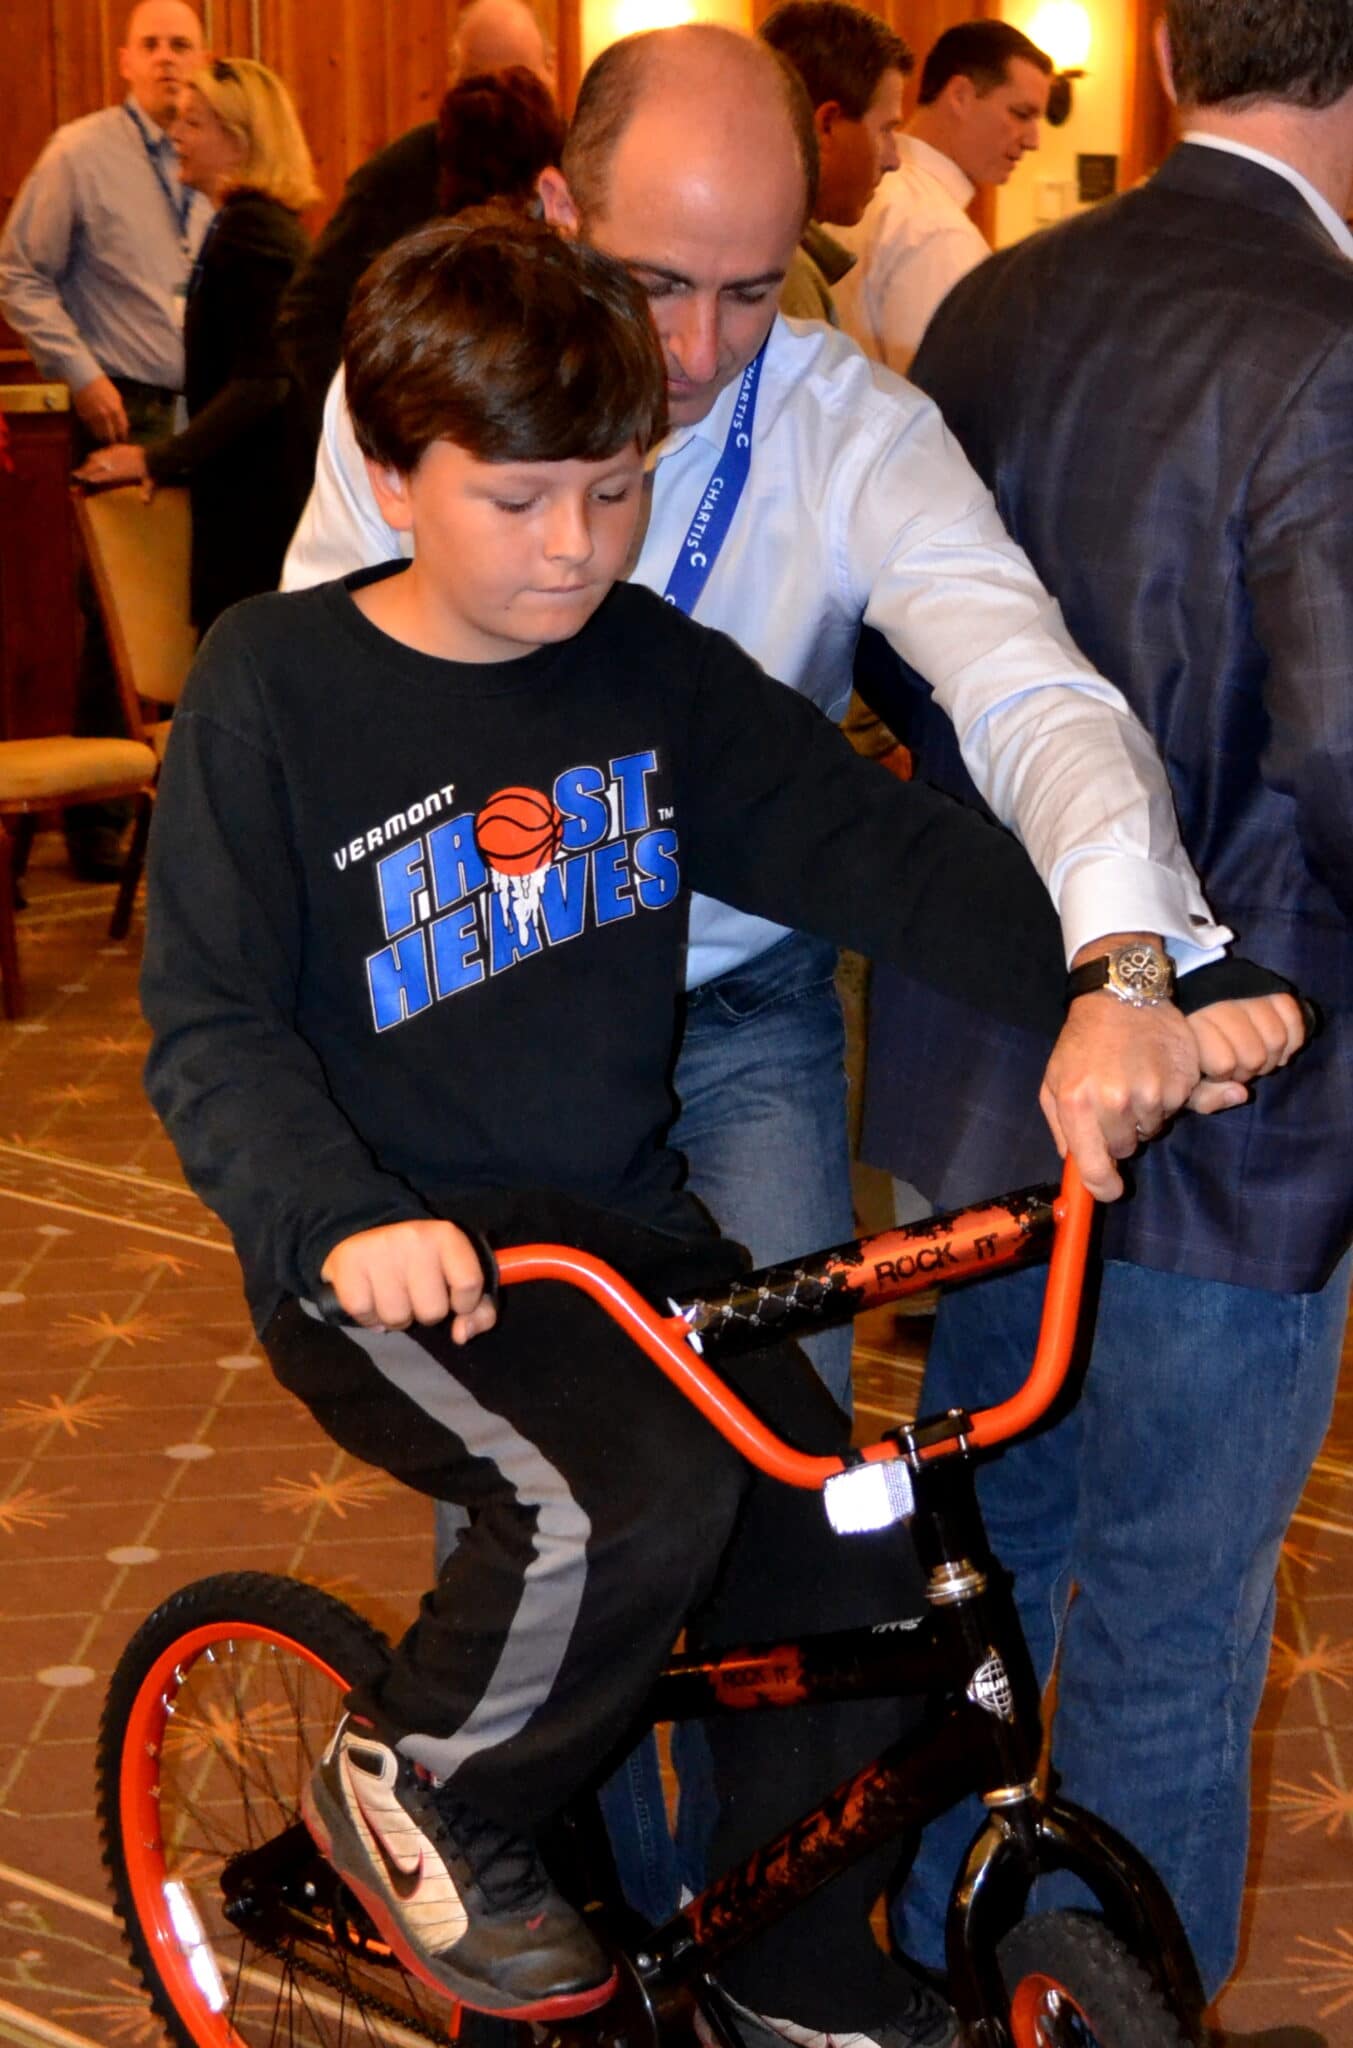 Chartis builds bikes for kids in Stowe VT